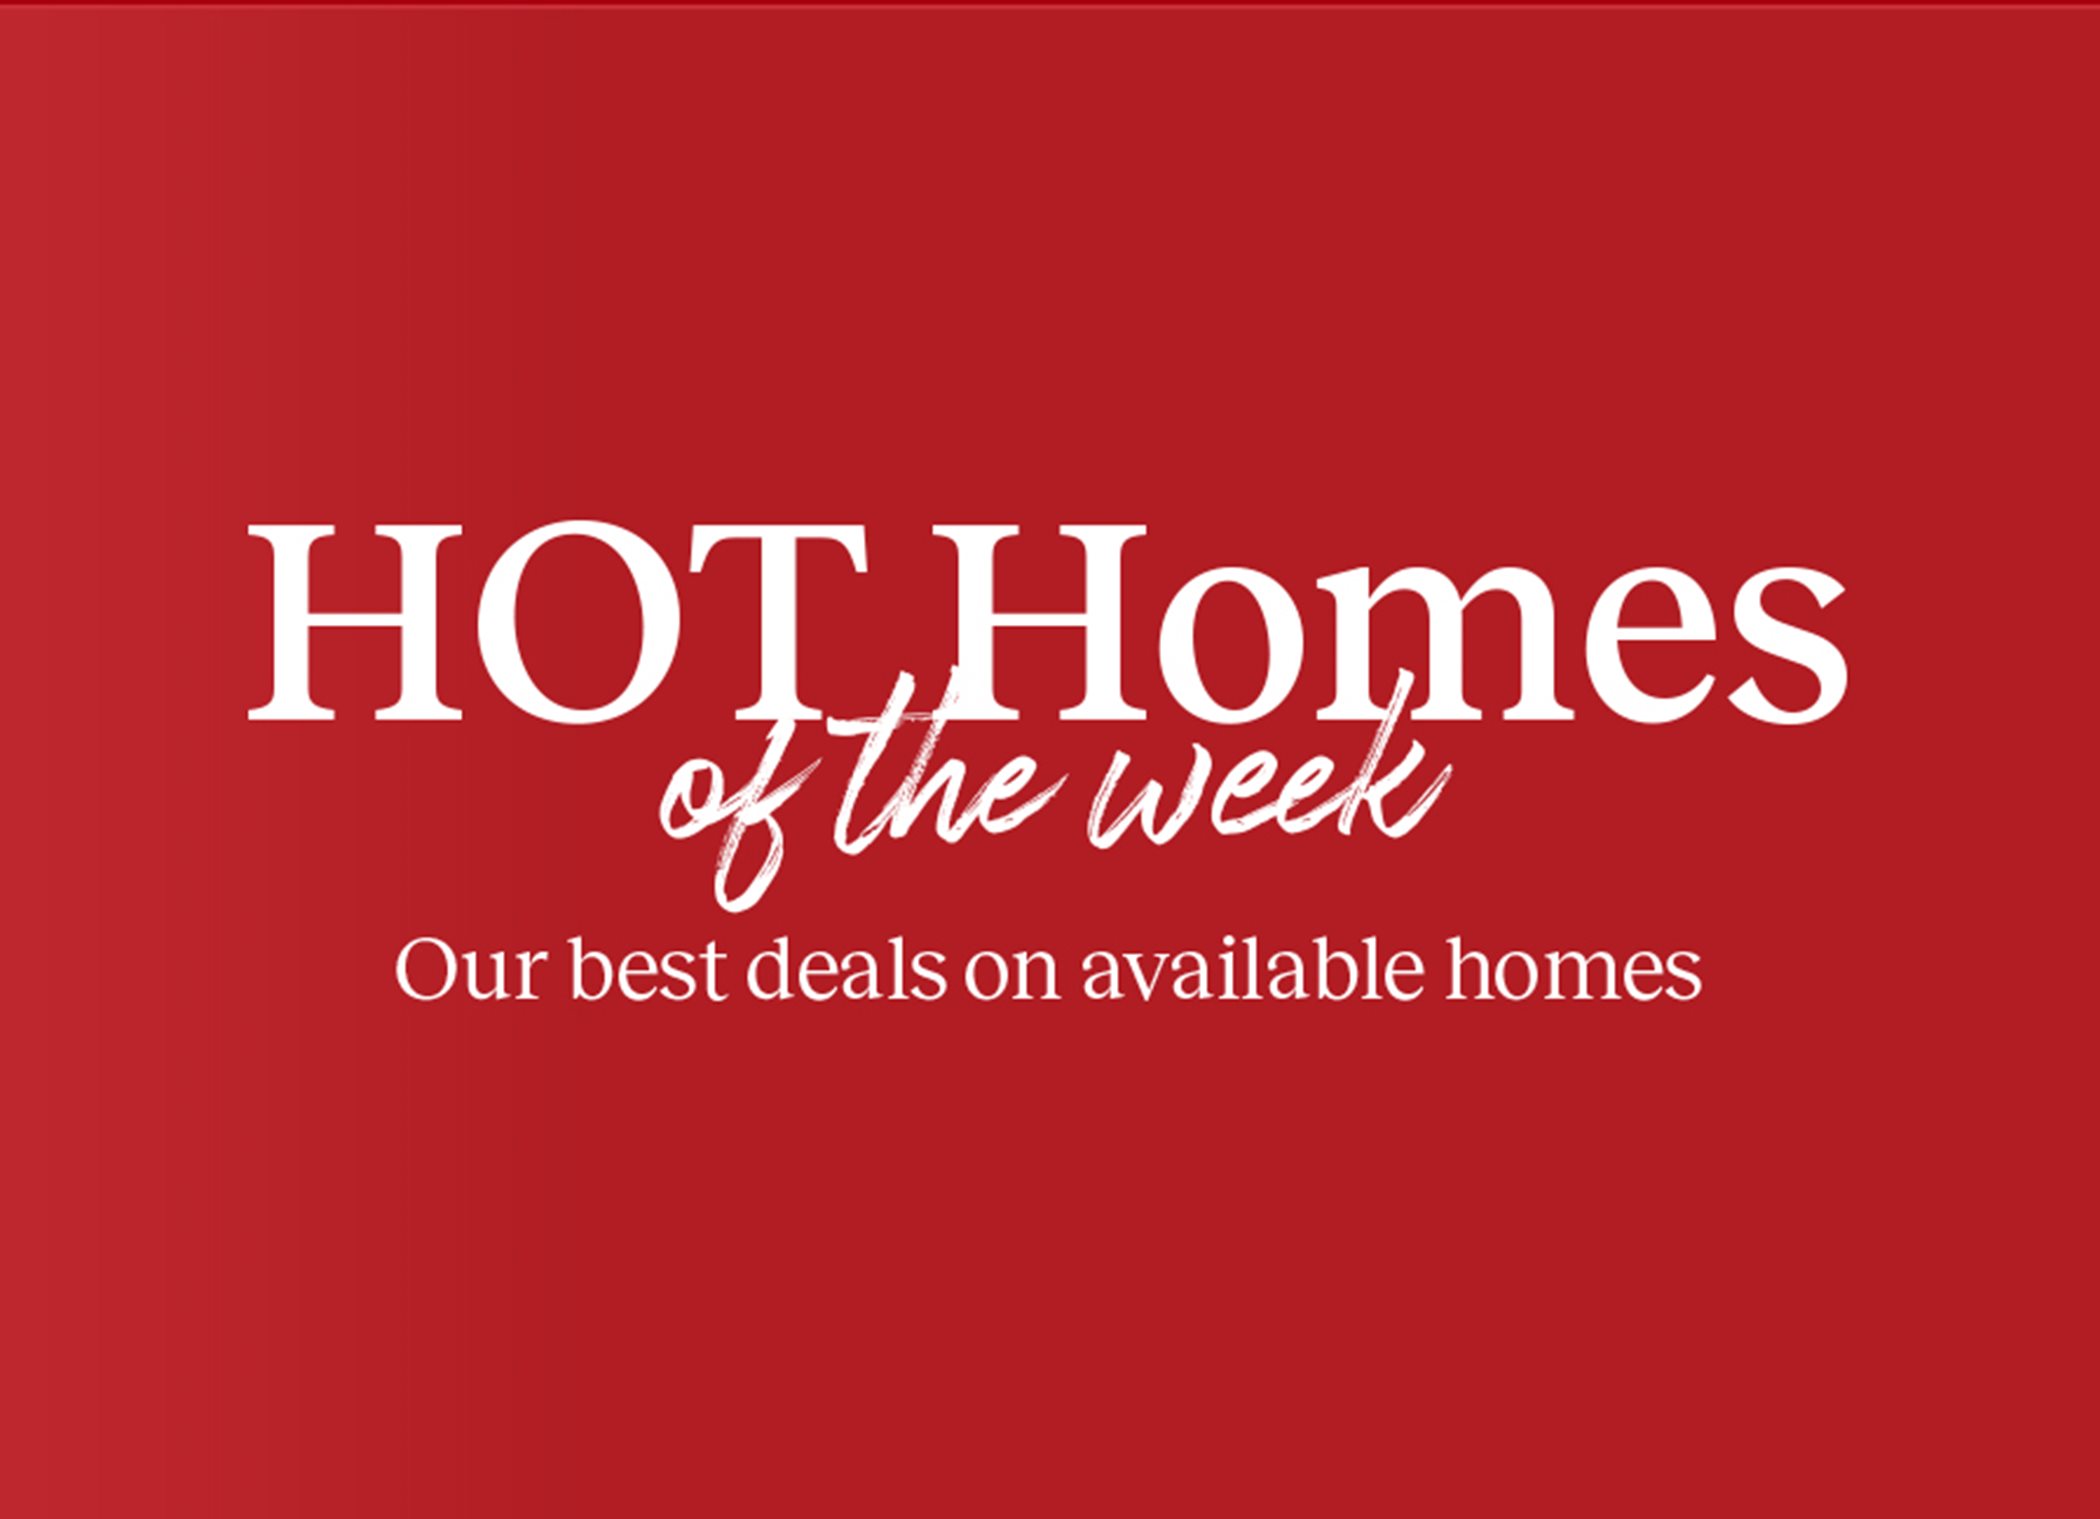 IMAGE: Hot Homes of the week